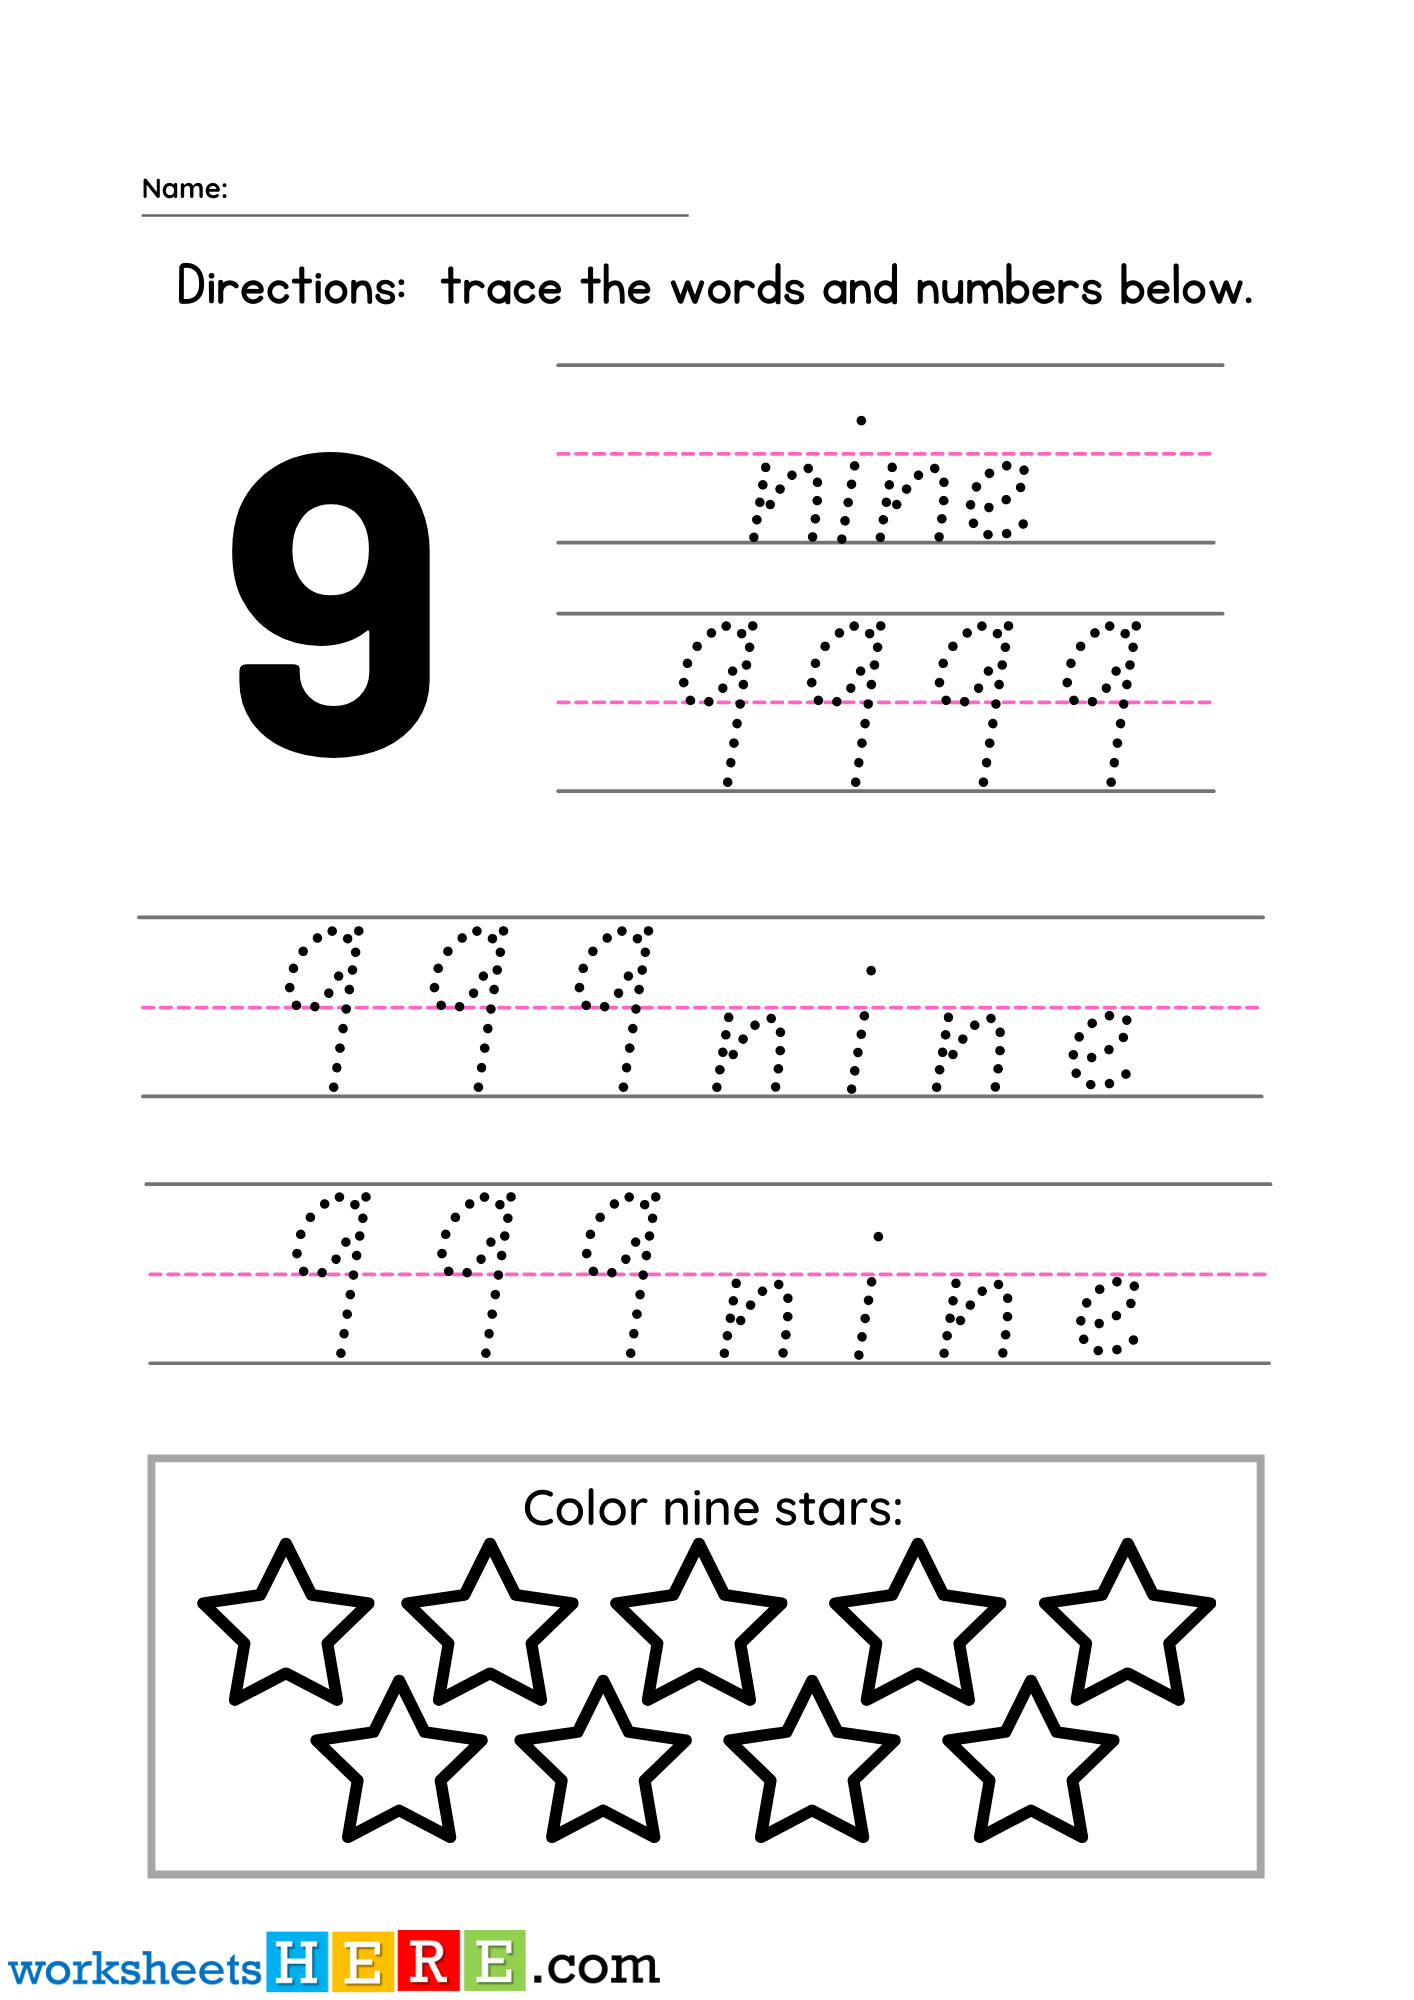 Trace the Number 9 and Word Activity For PDF Worksheet For Kindergarten